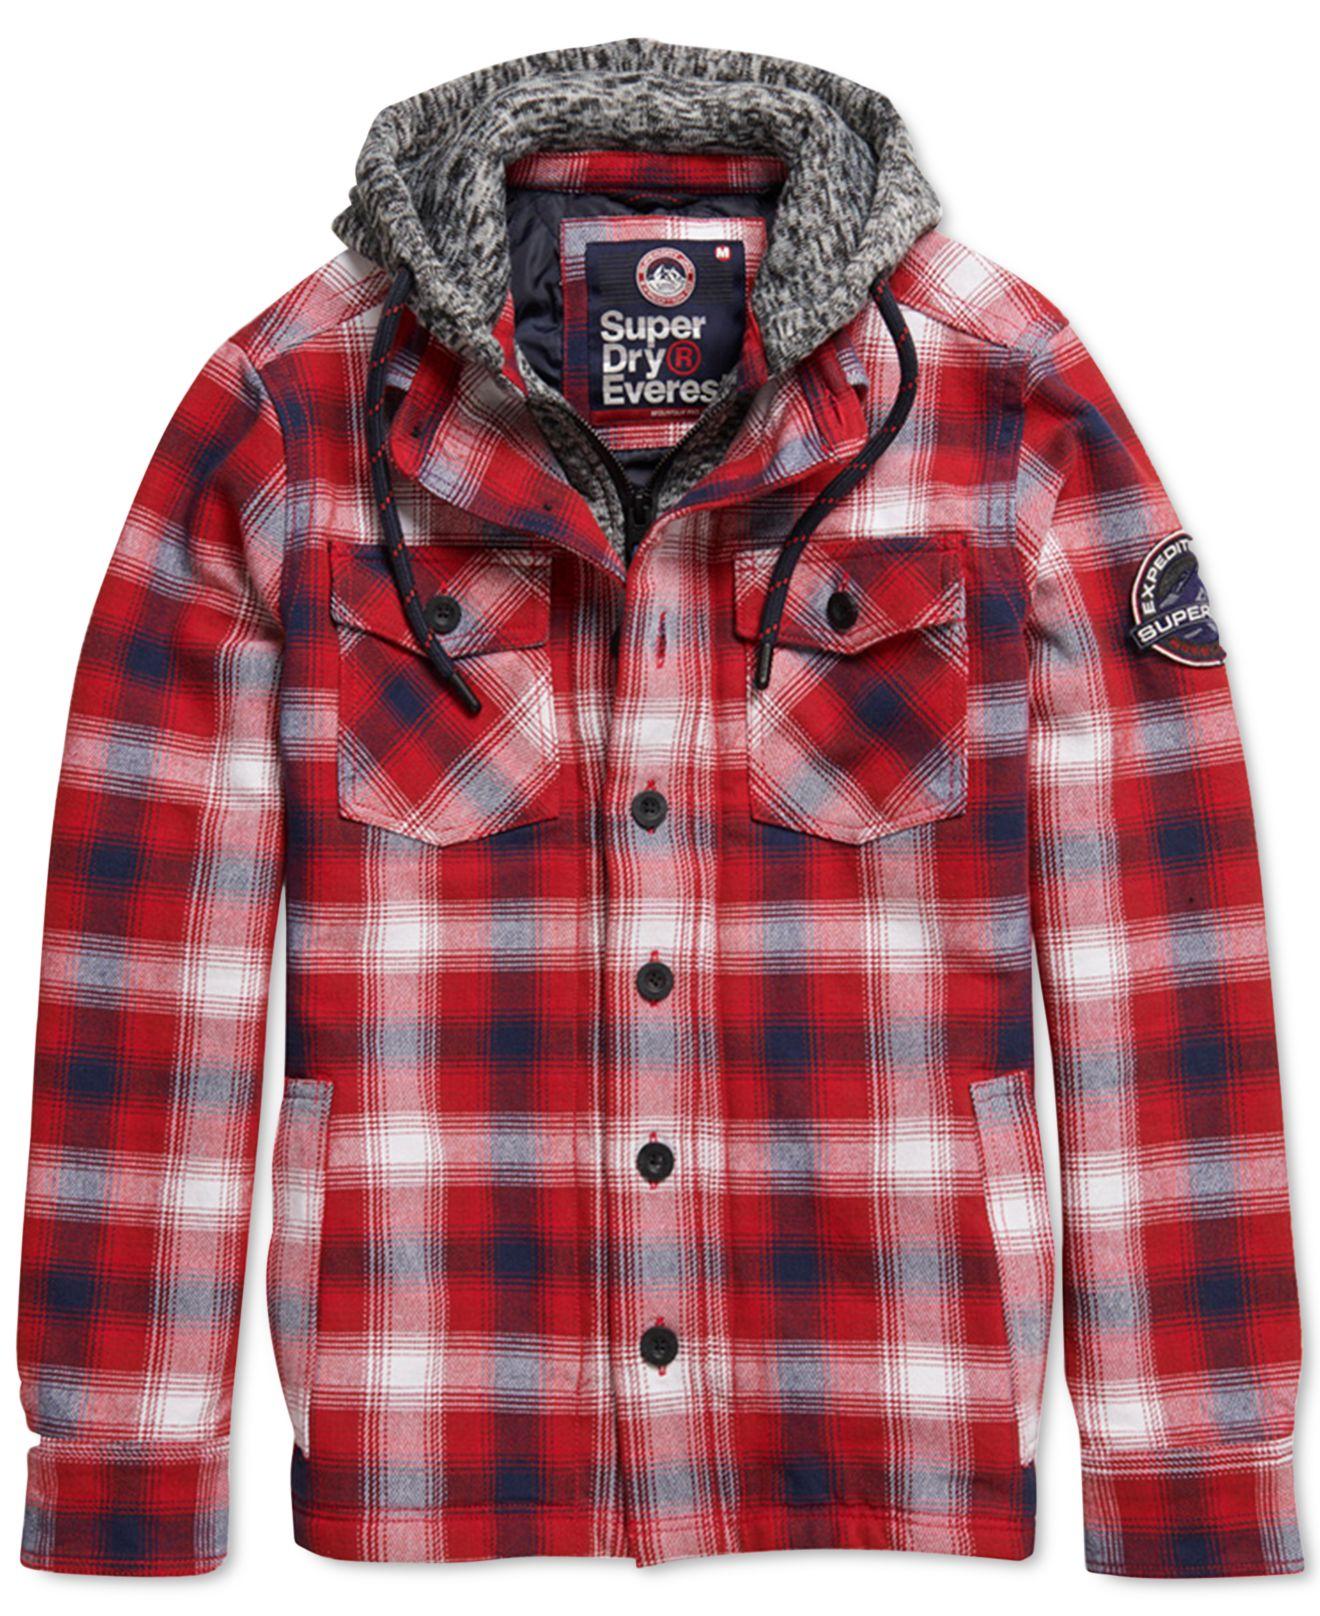 Superdry Everest Storm Hoodie Online Sale, UP TO 68% OFF |  www.apmusicales.com